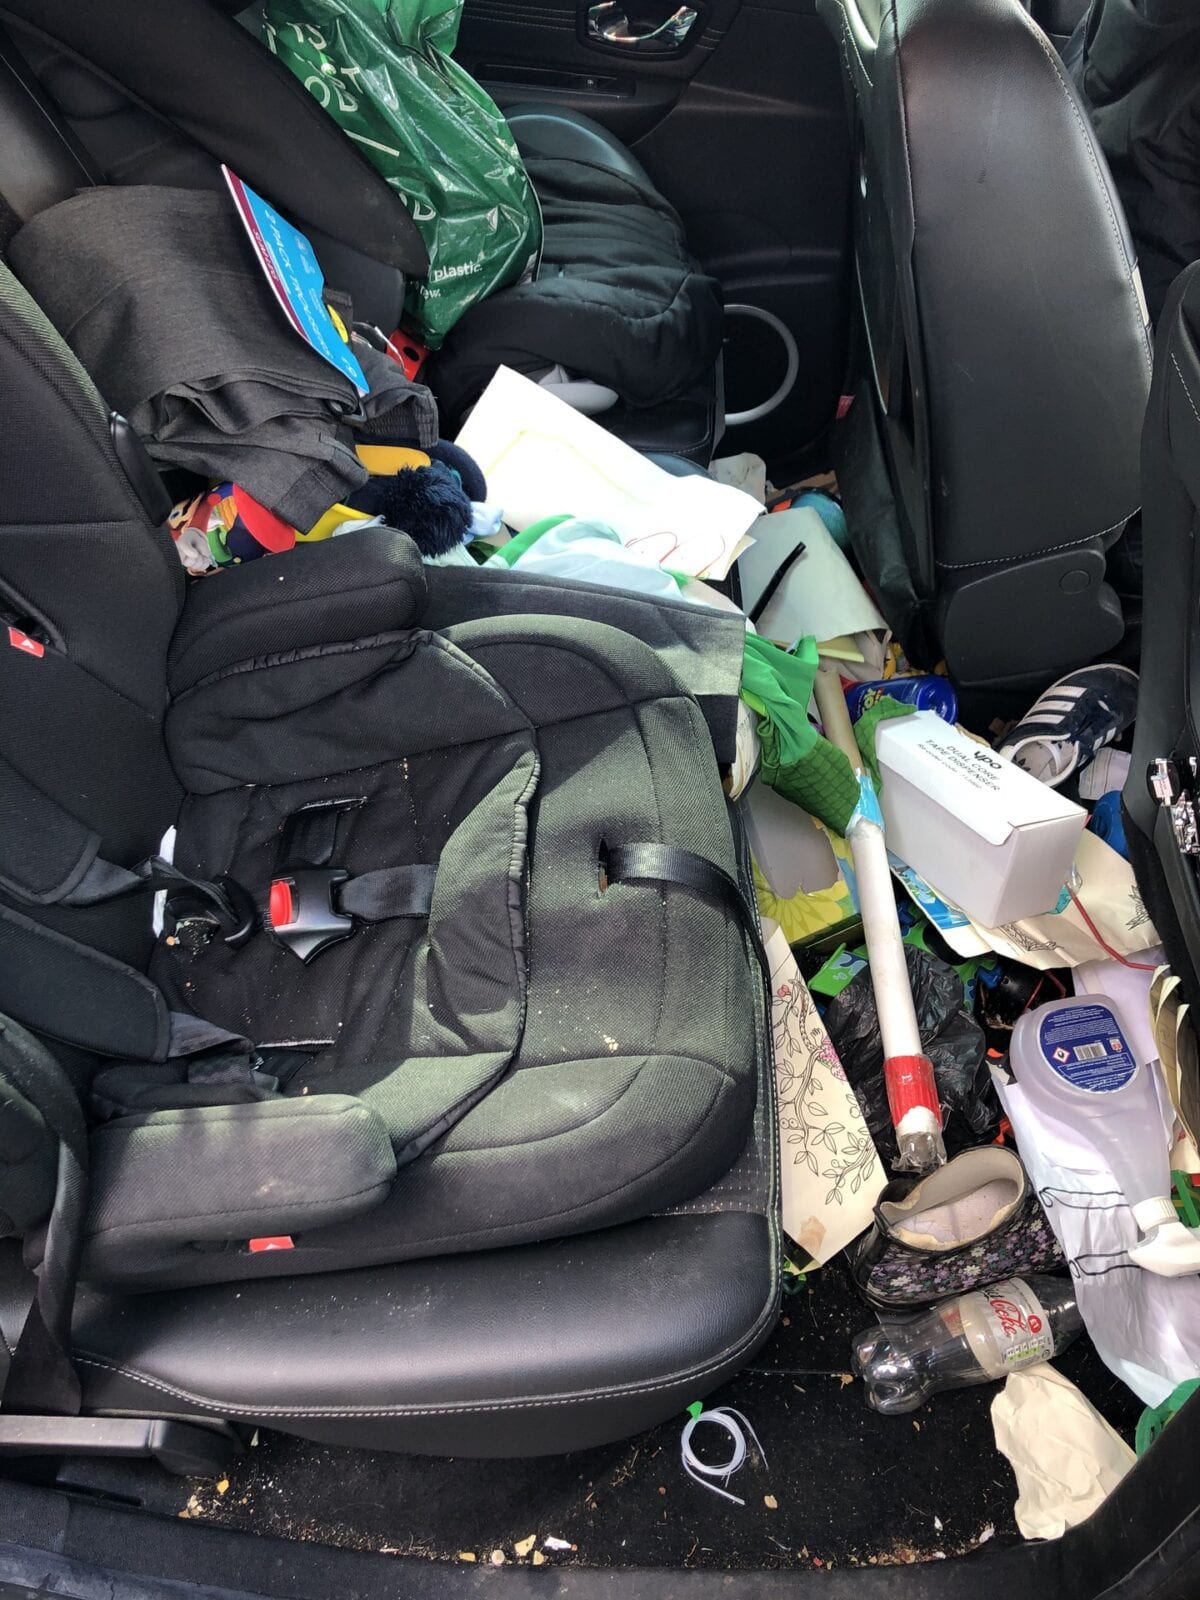 A woman from Manchester has been named as having the messiest car in the UK, The Manc